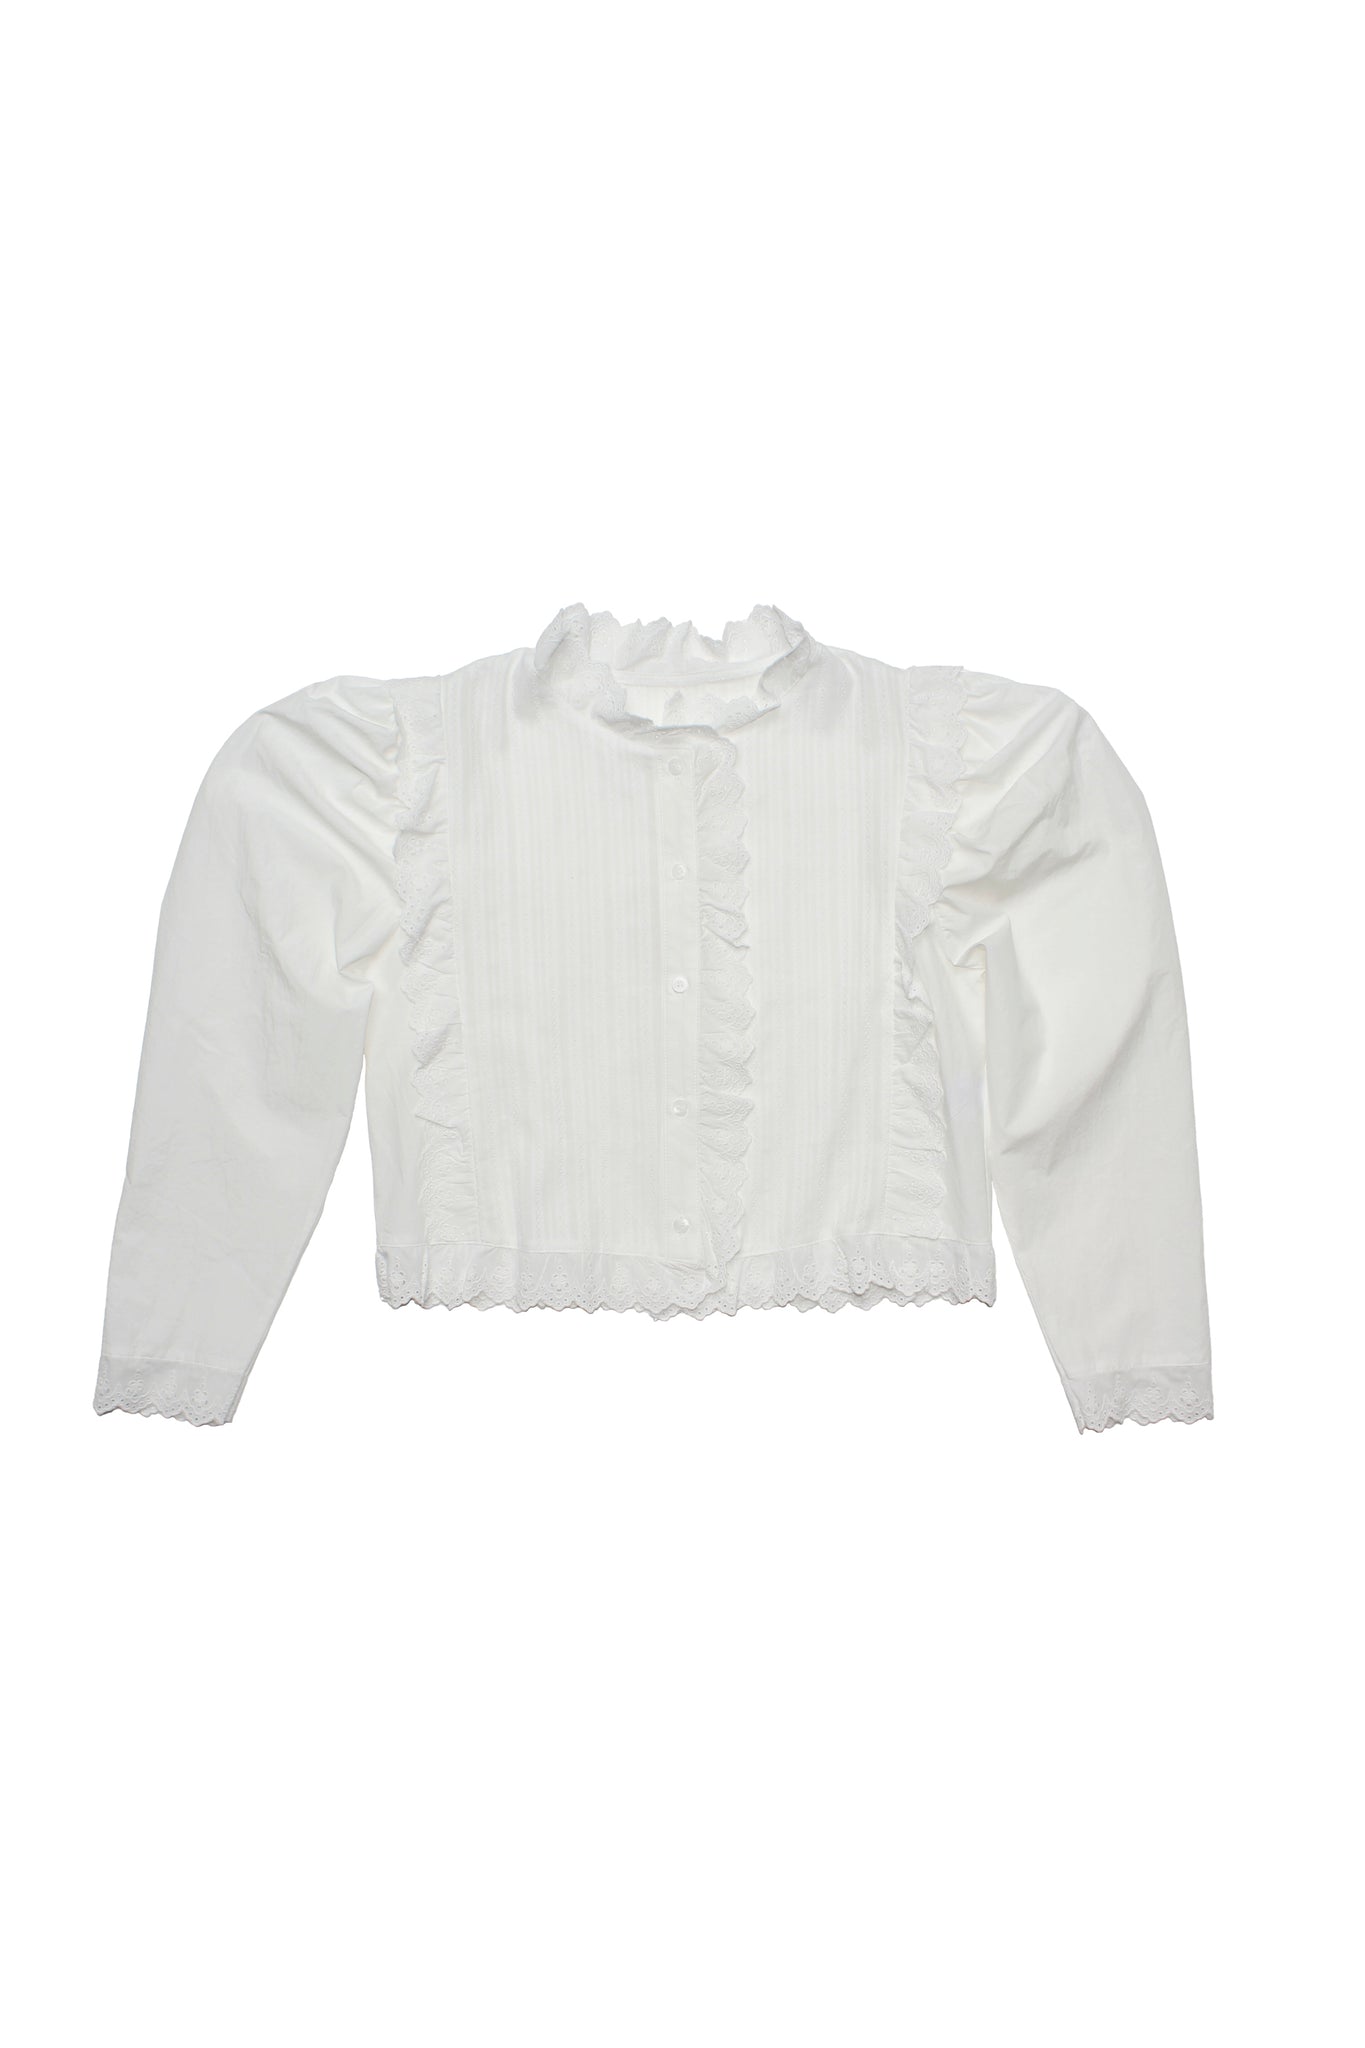 Sweet Lace Shirts in White